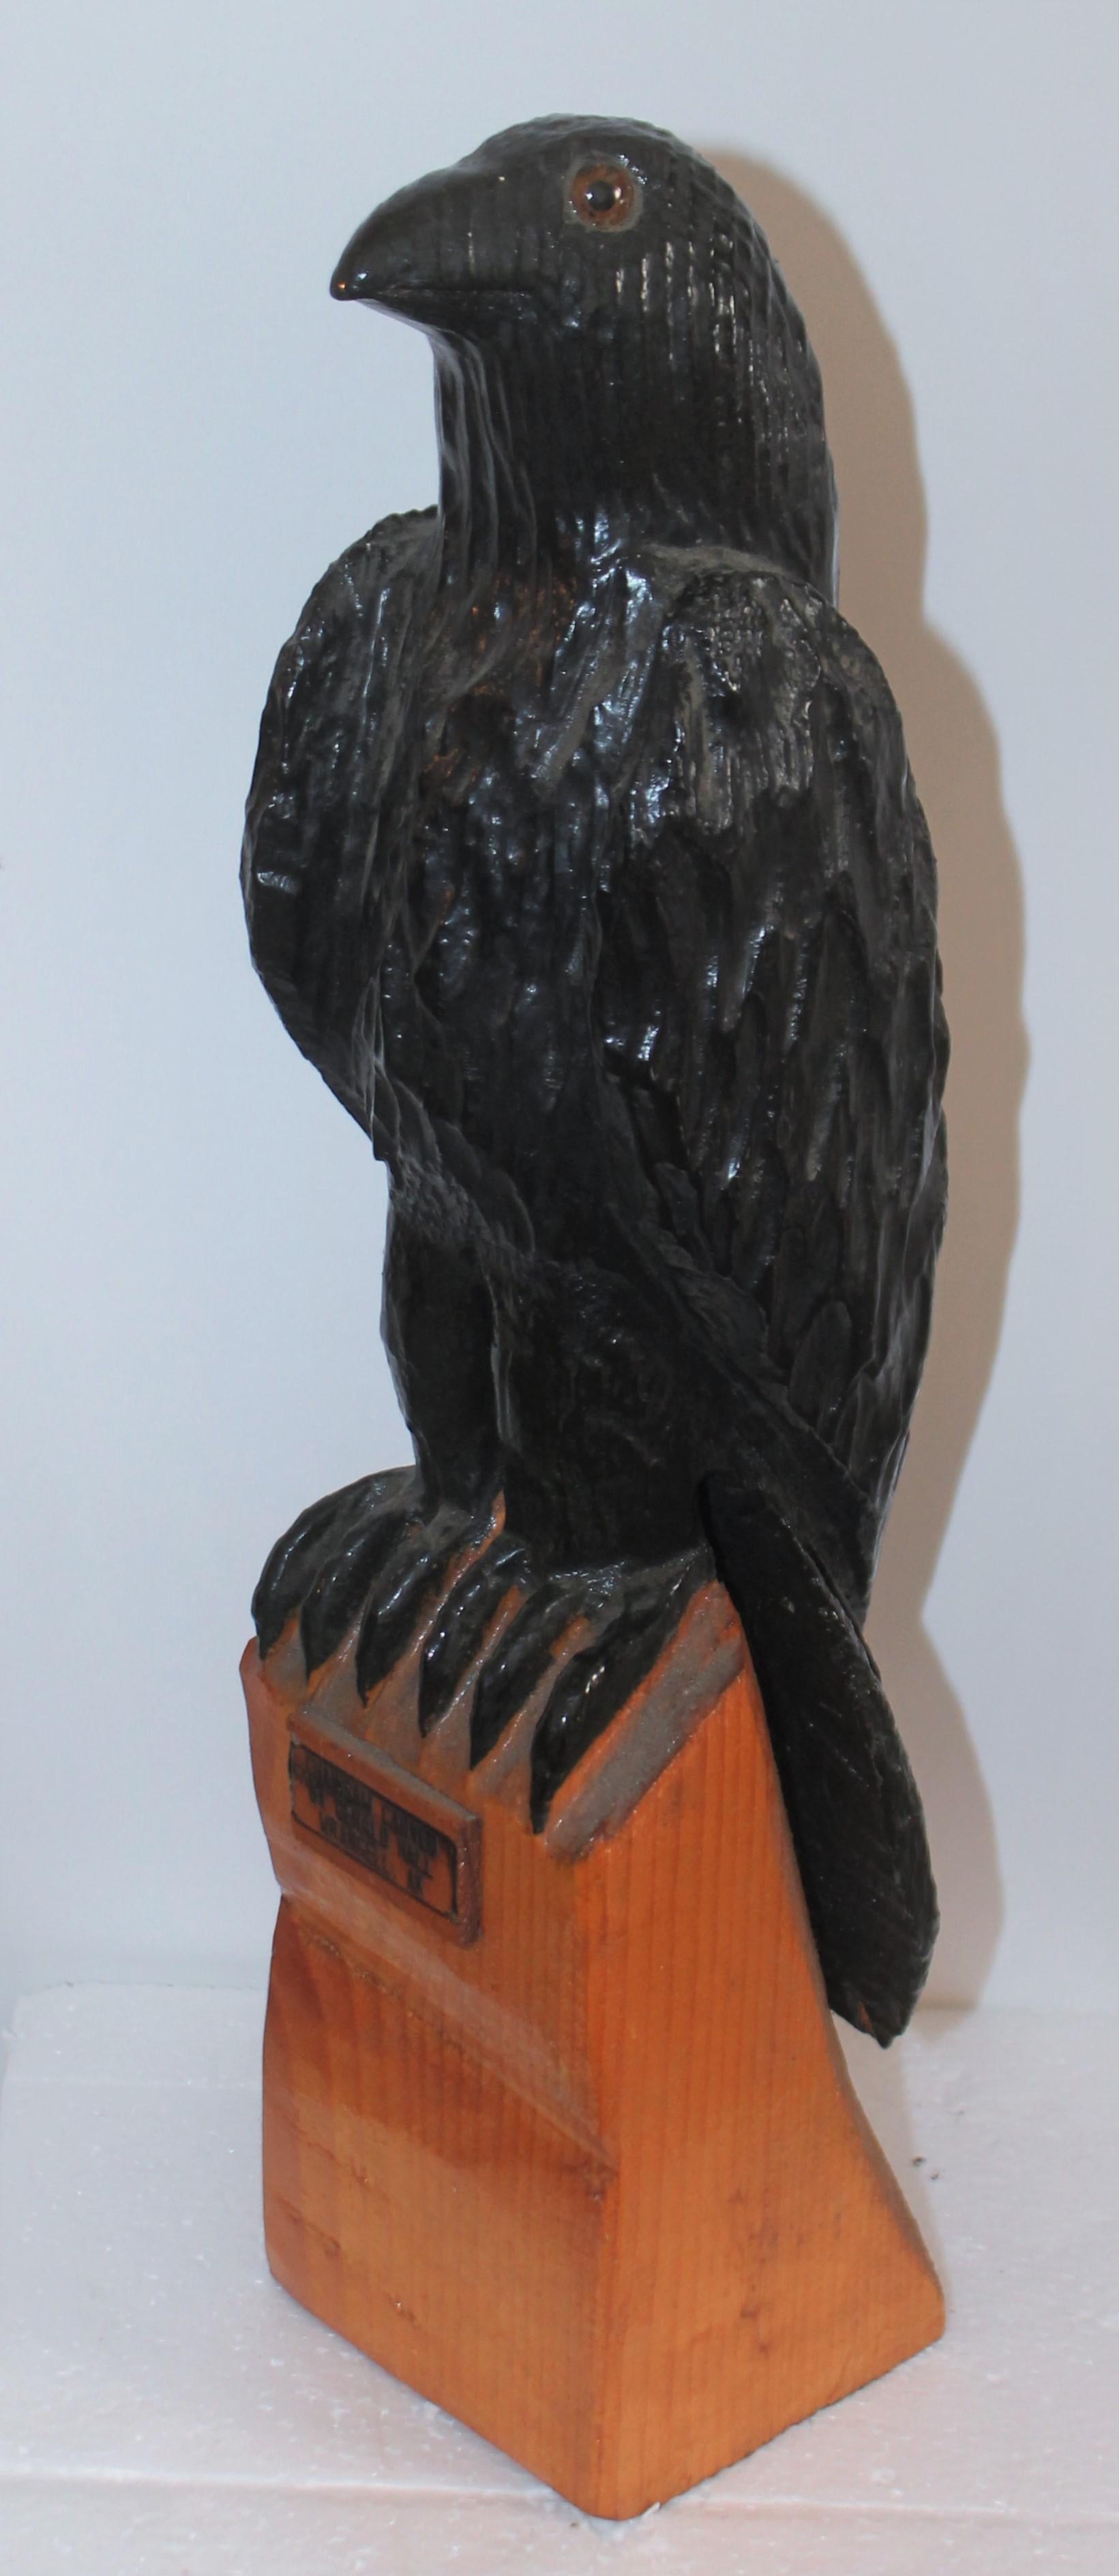 This handmade by Gerald Hall with a chain saw and the crow has glass eyes. The bird is original black paint as well. The condition is very good.